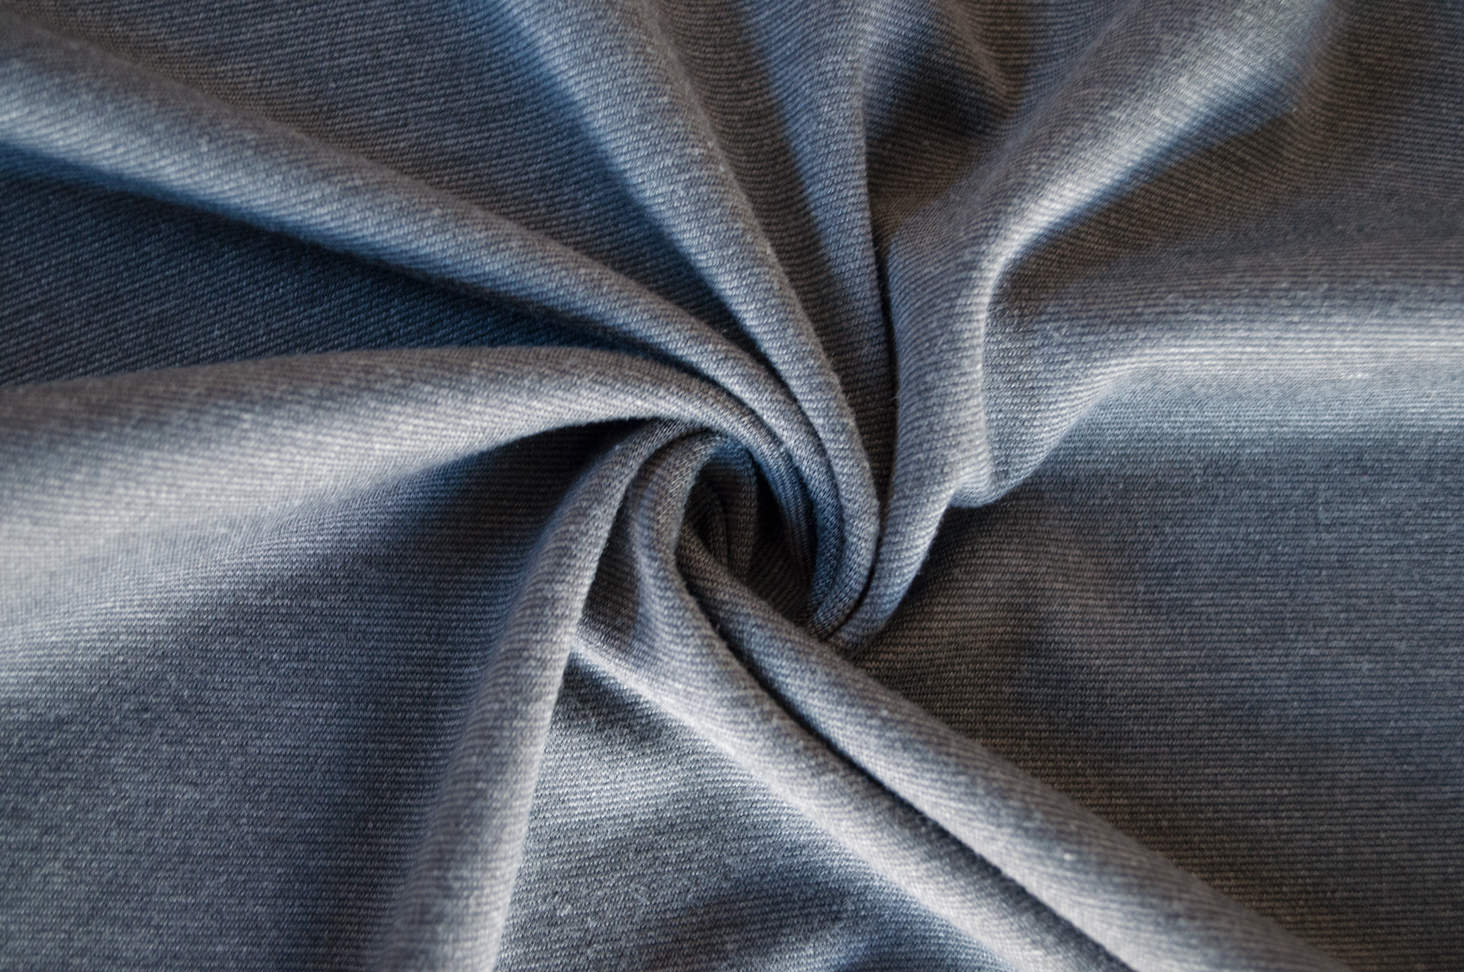  3 Yards of Ponte De Roma Double Knit Fabric, Stretch